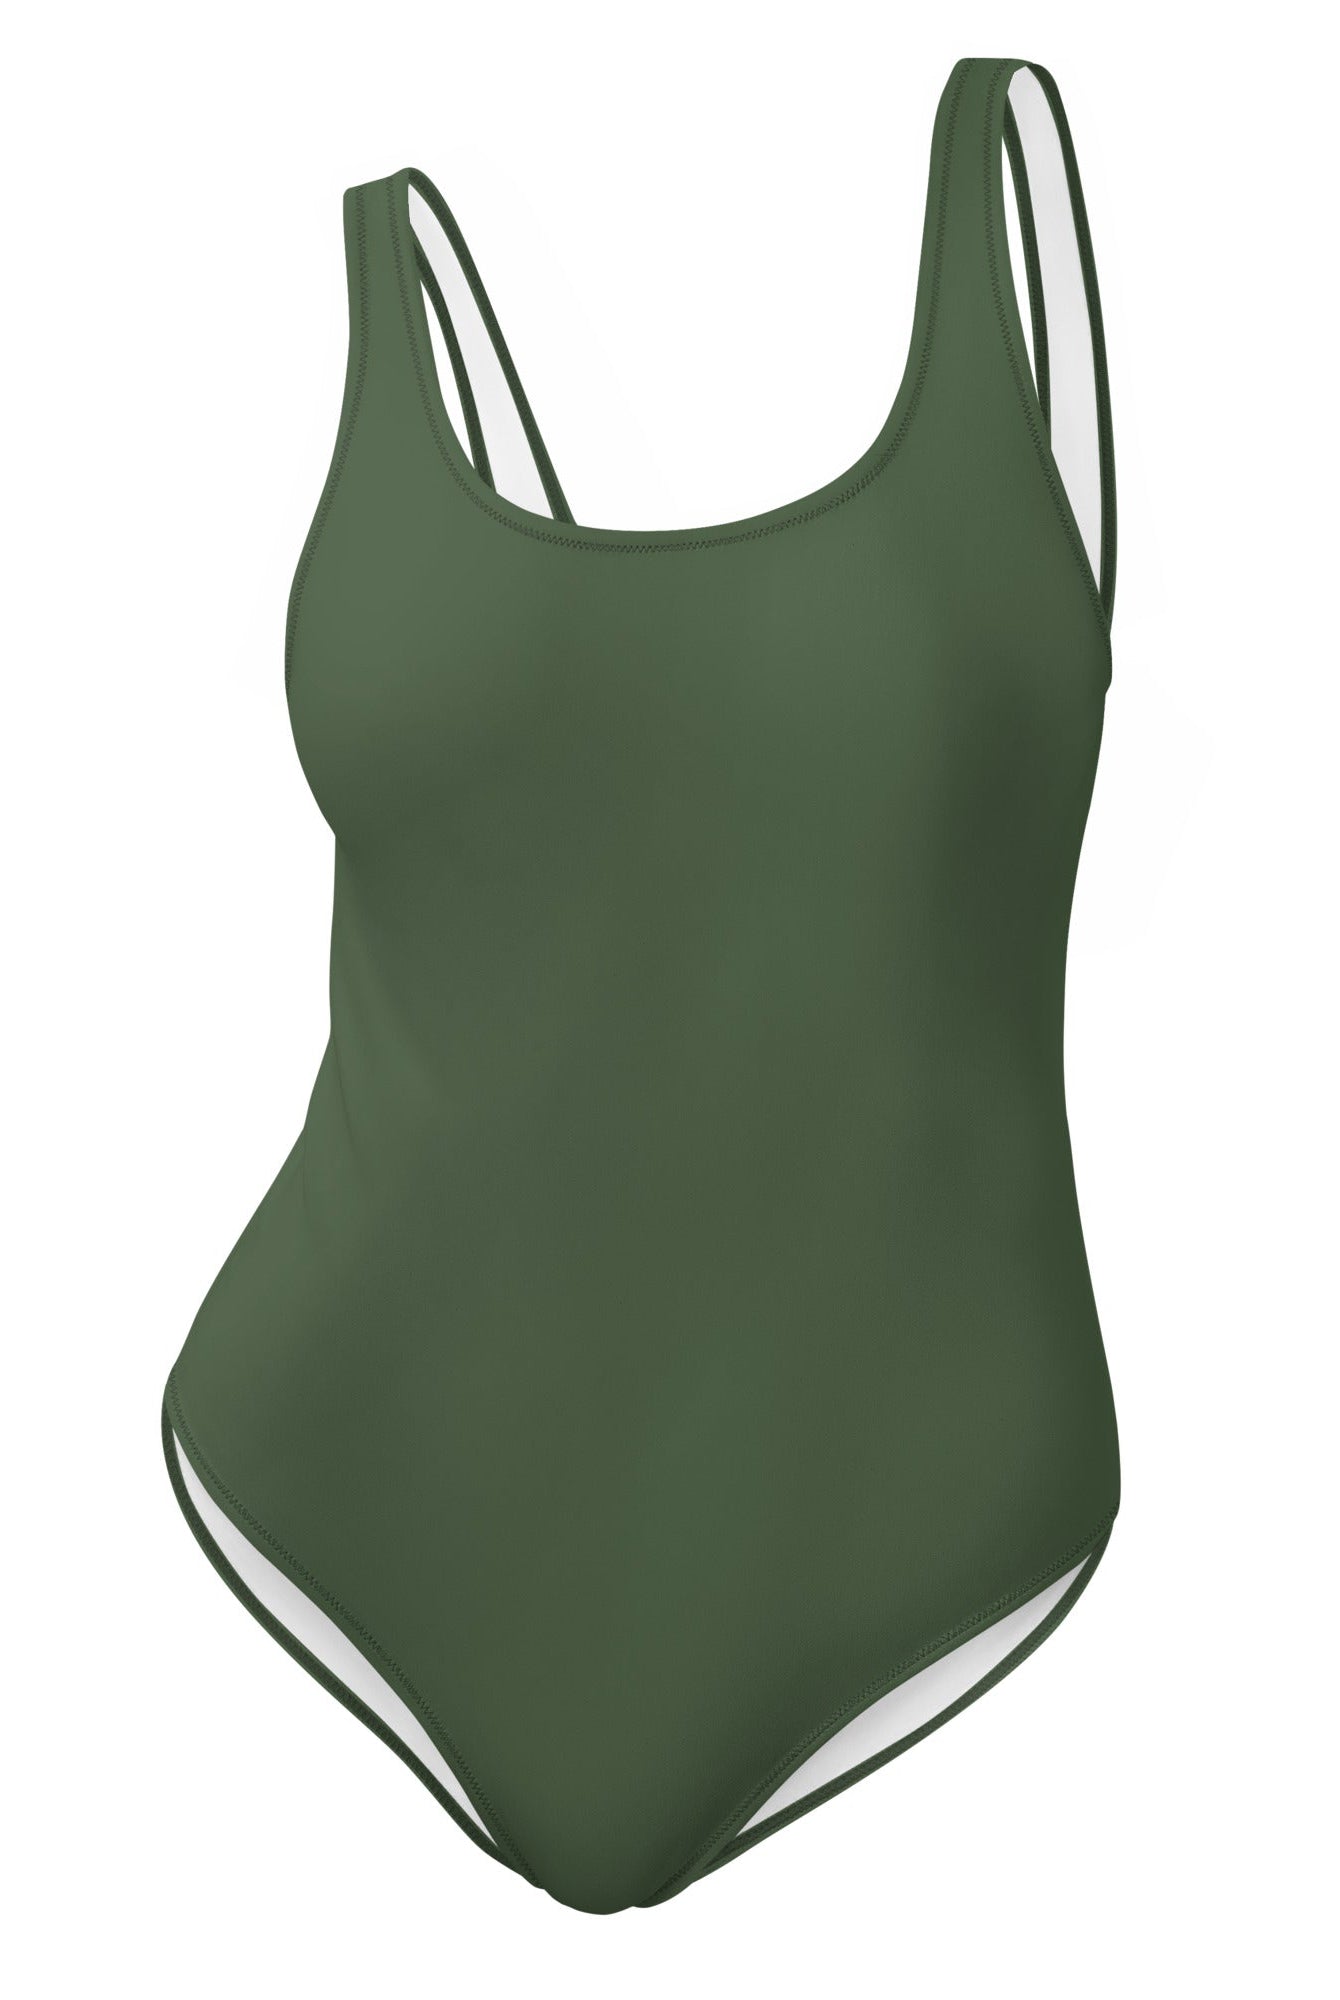 Tom Thumb One-Piece Swimsuit - One-Piece Swimsuit - DRAGON FOXX™ - Tom Thumb One-Piece Swimsuit - 2781424_9014 - XS - Tom Thumb - One-Piece - Dragon Foxx™ - Dragon Foxx™ One-Piece Swimsuit - Dragon Foxx™ Swimsuit